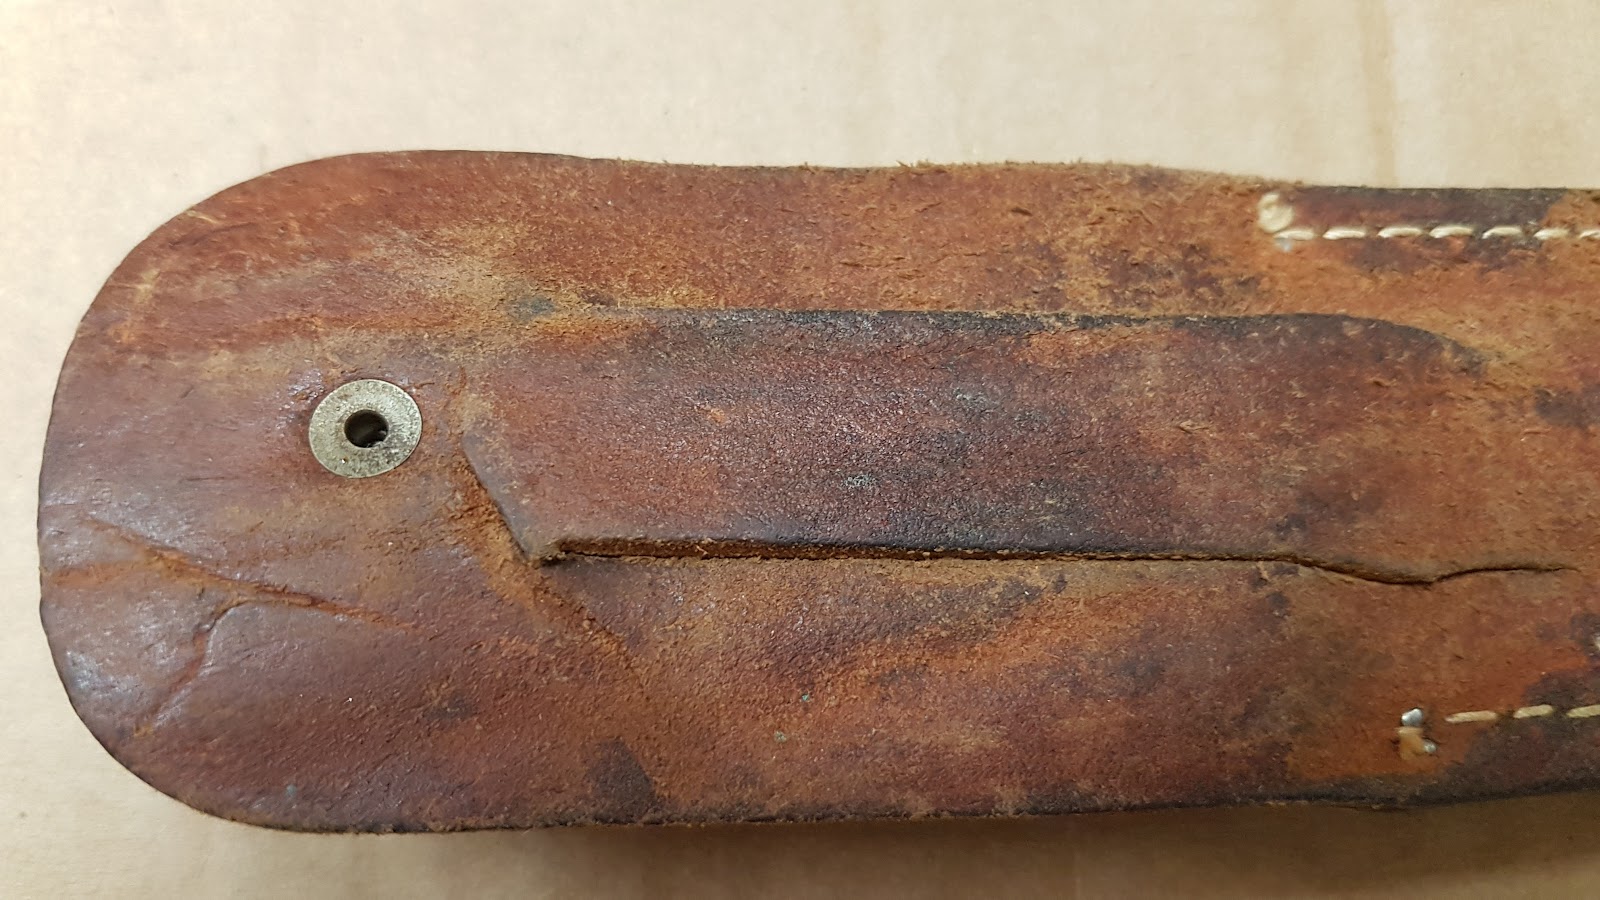 Old, dried out leather sheath